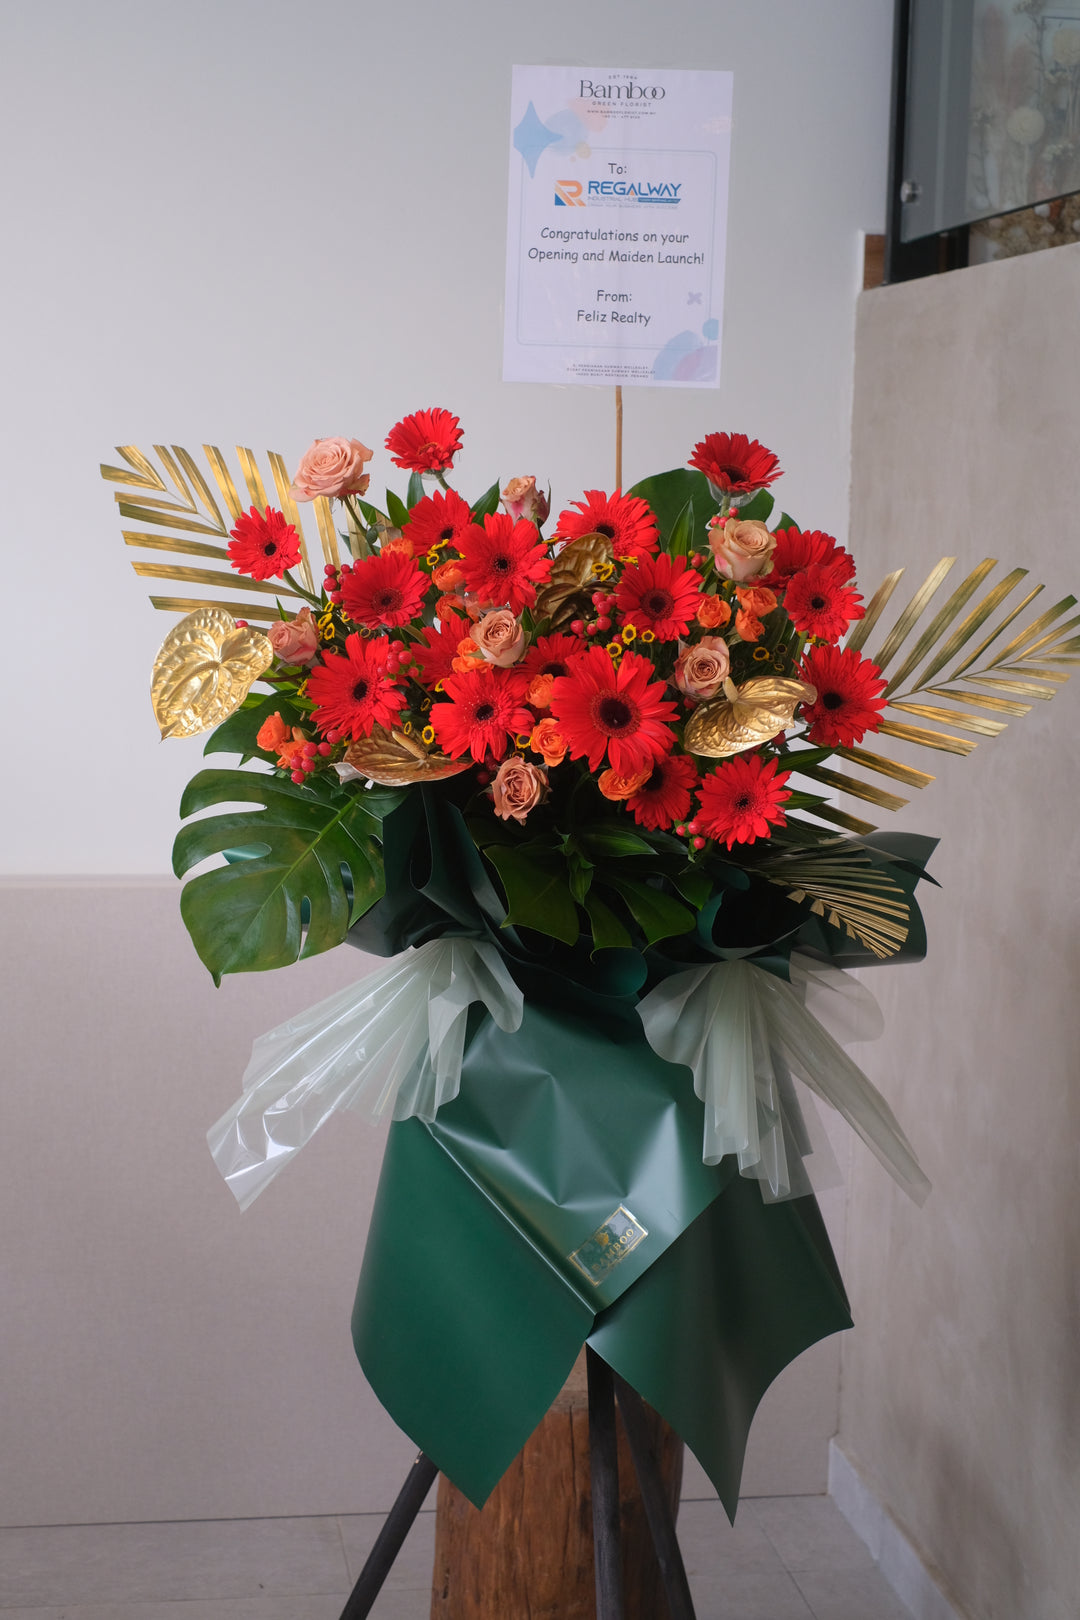 Sending a fresh bouquet where blossoms symbolize growth and opportunity. A warm and welcoming gesture to celebrate the opening of a new venture or chapter in life.